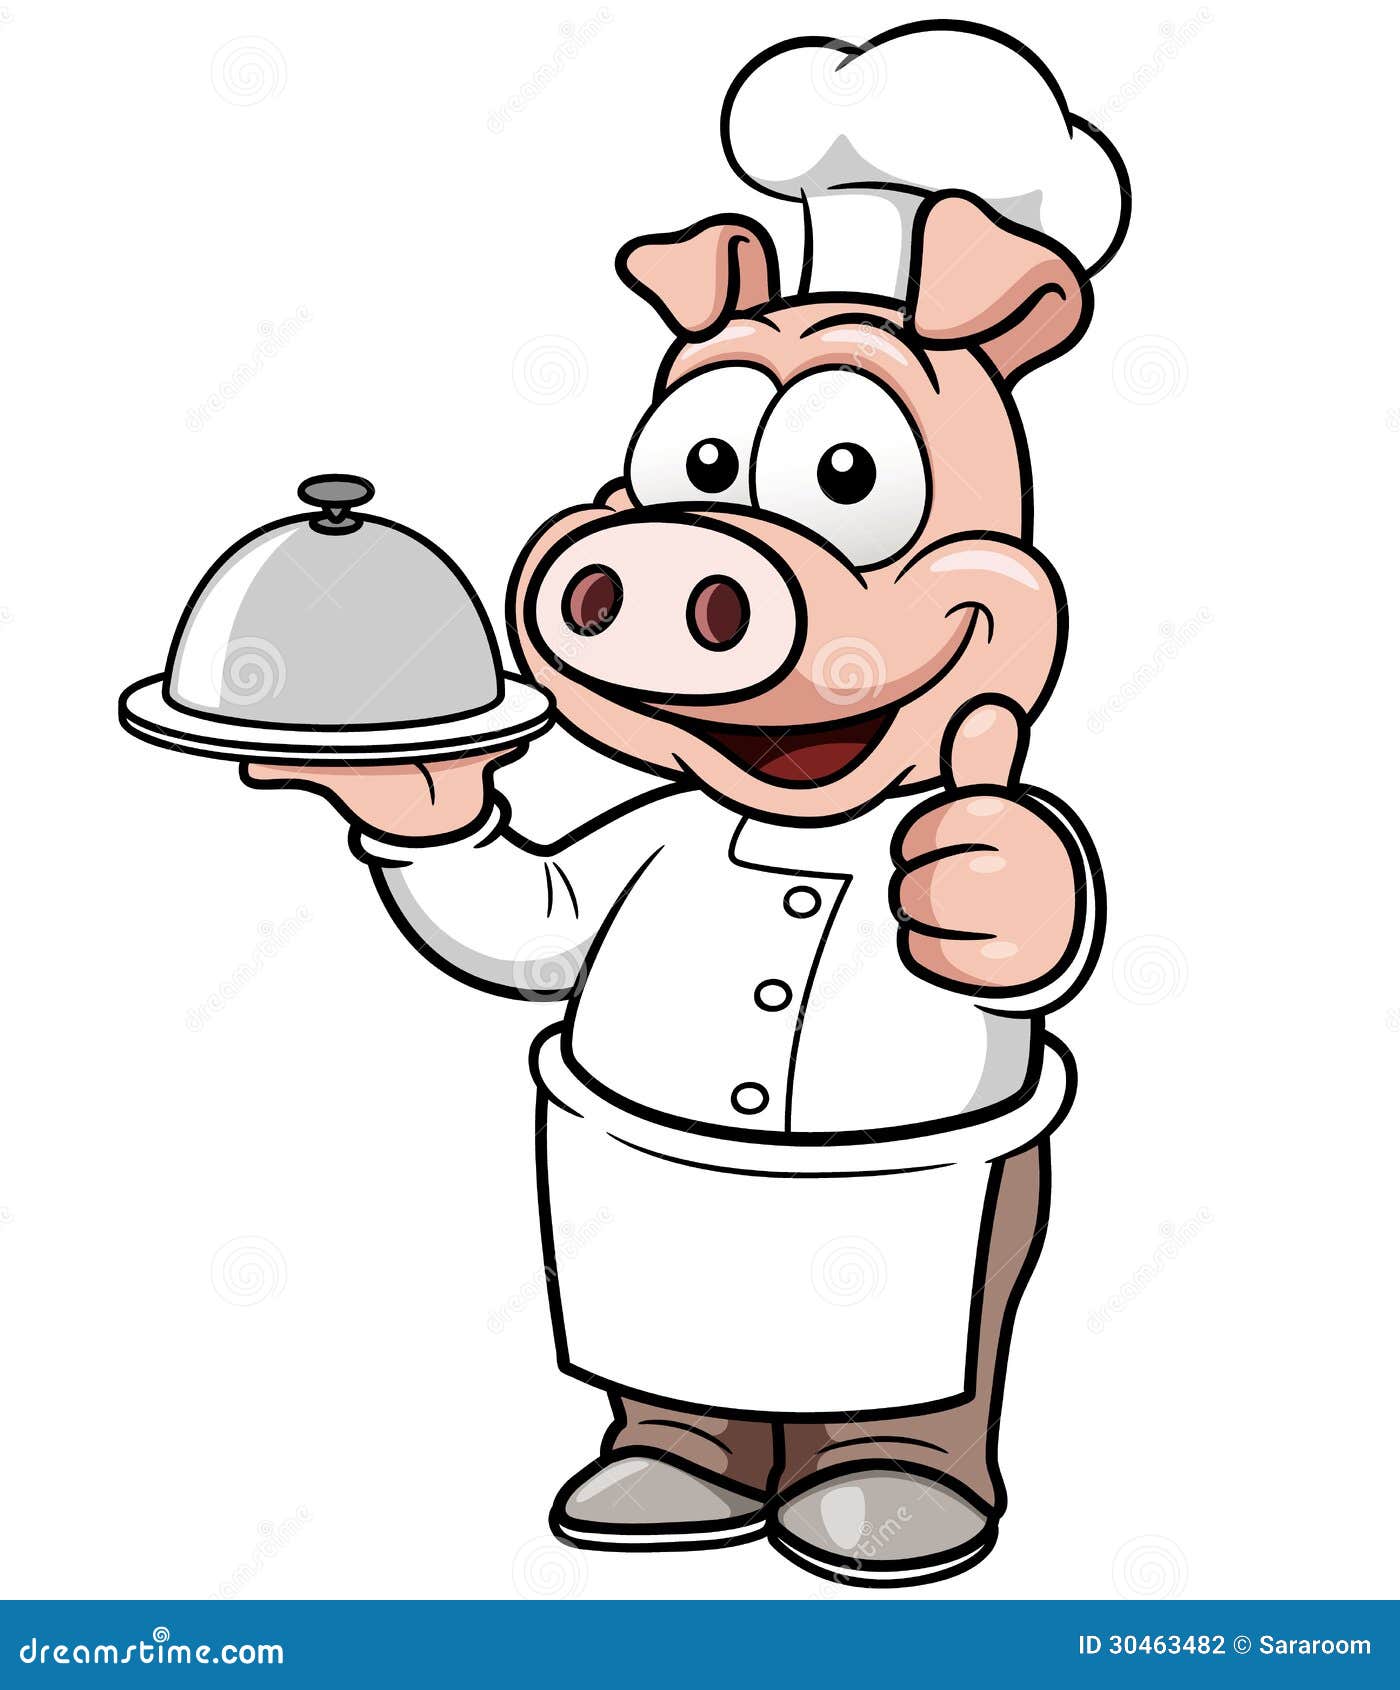 free clipart pig chef - photo #24